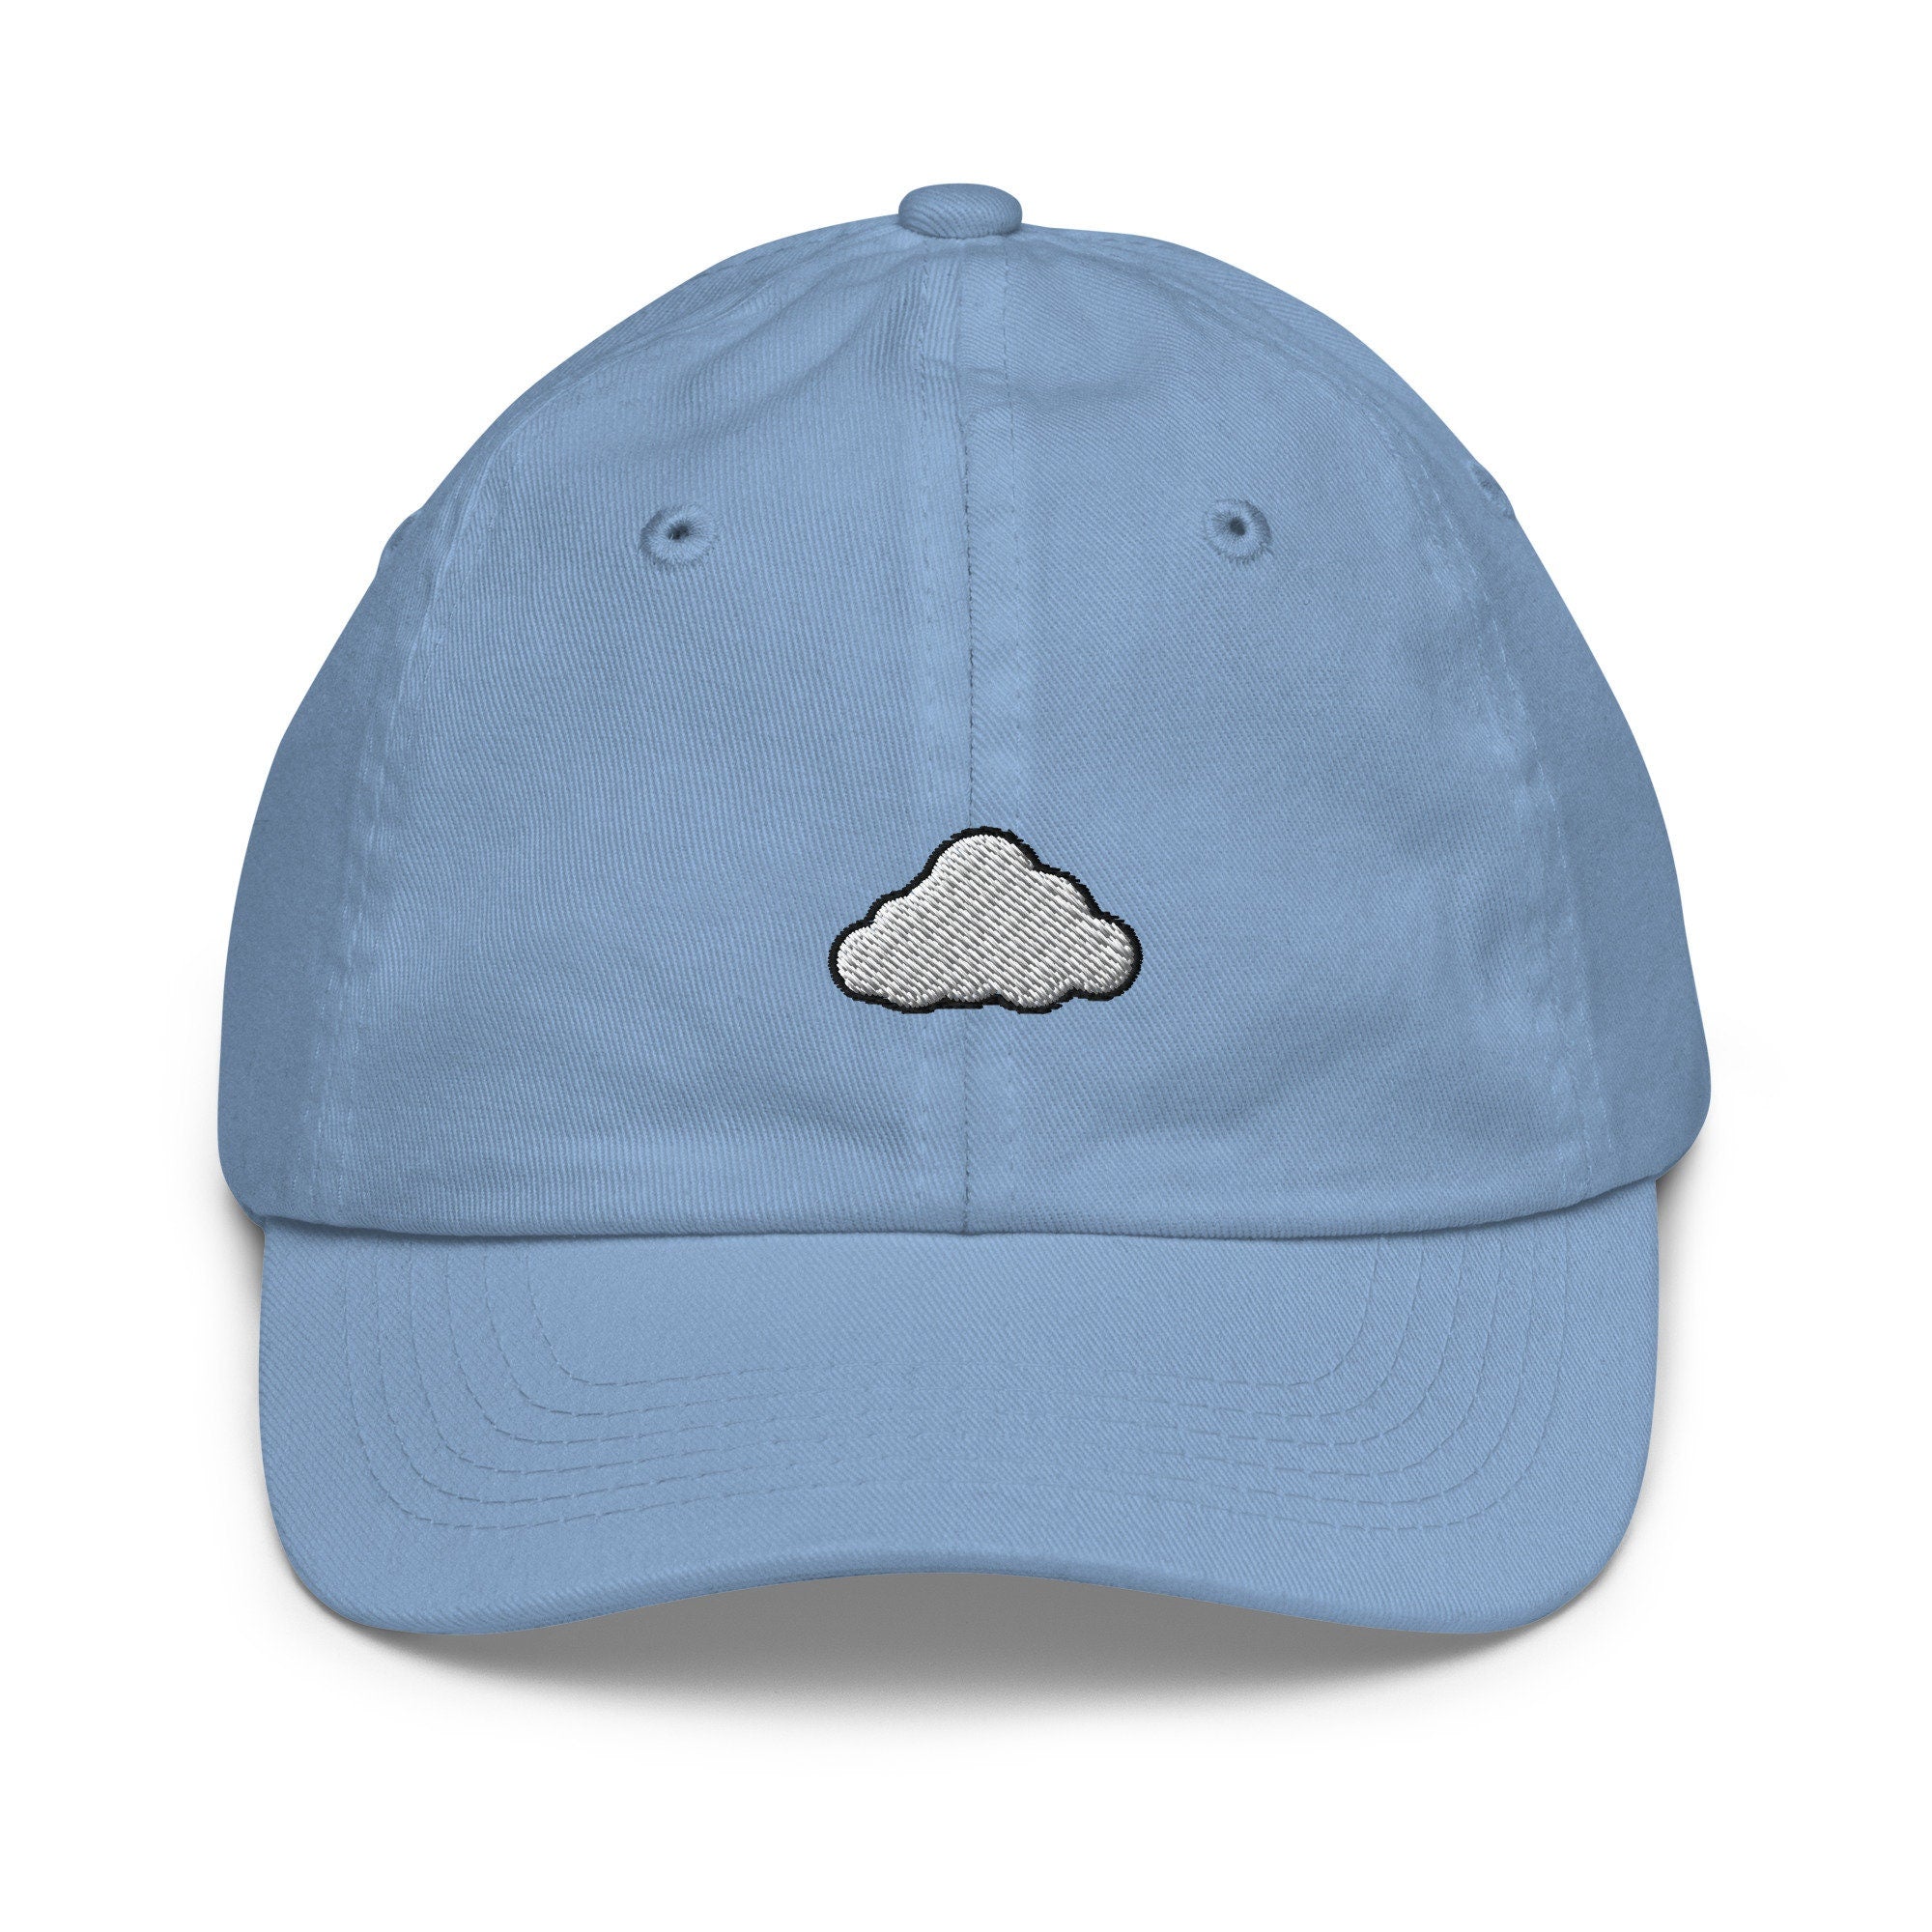 Kids Cloud Youth Baseball Cap, Embroidered Kids Hat, Childrens Hat Gift - Multiple Colors